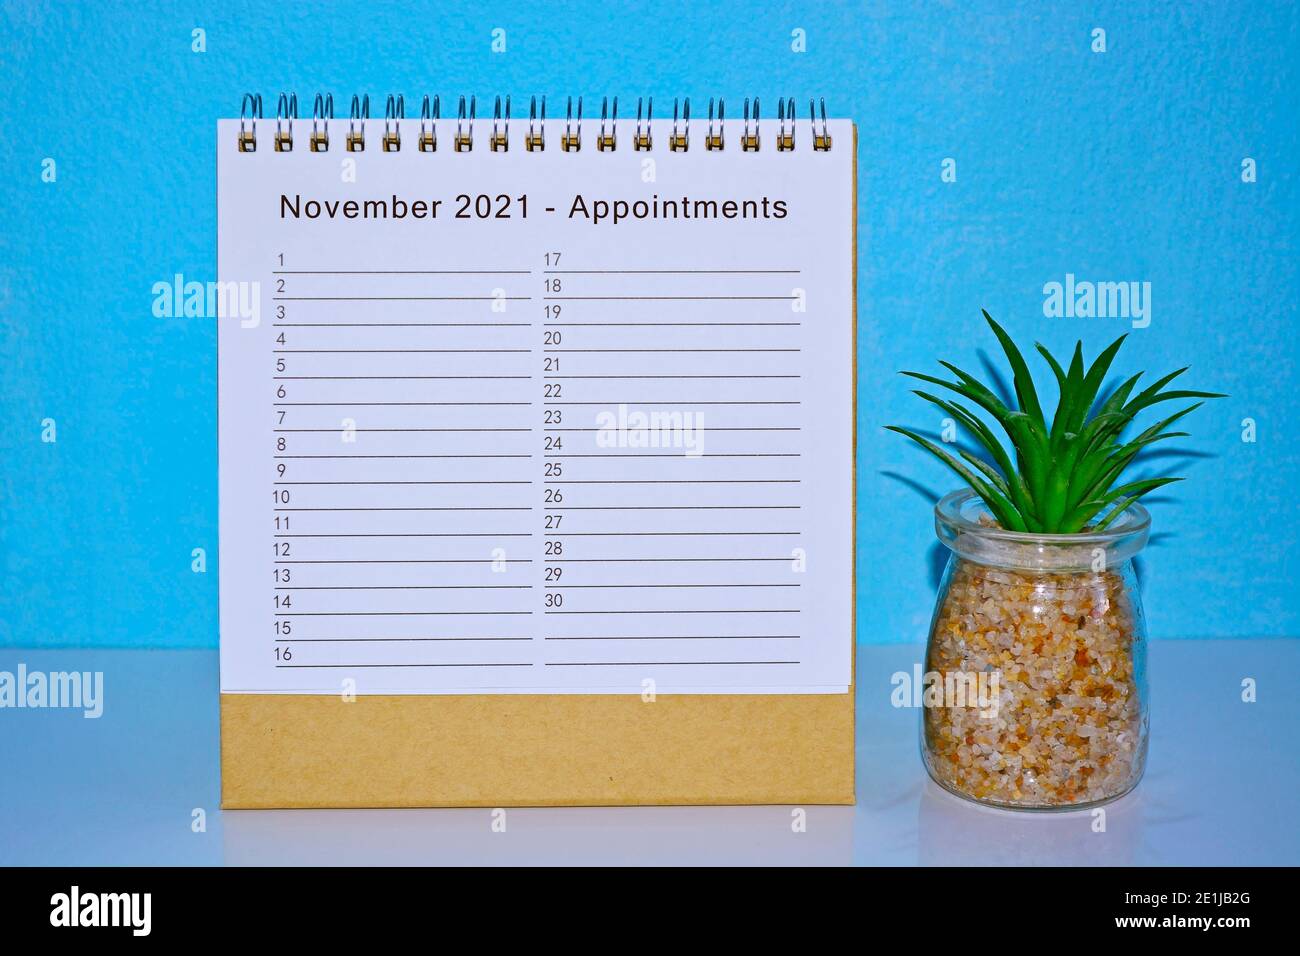 November 2021 Appointments calendar with blue background and potted plant Stock Photo